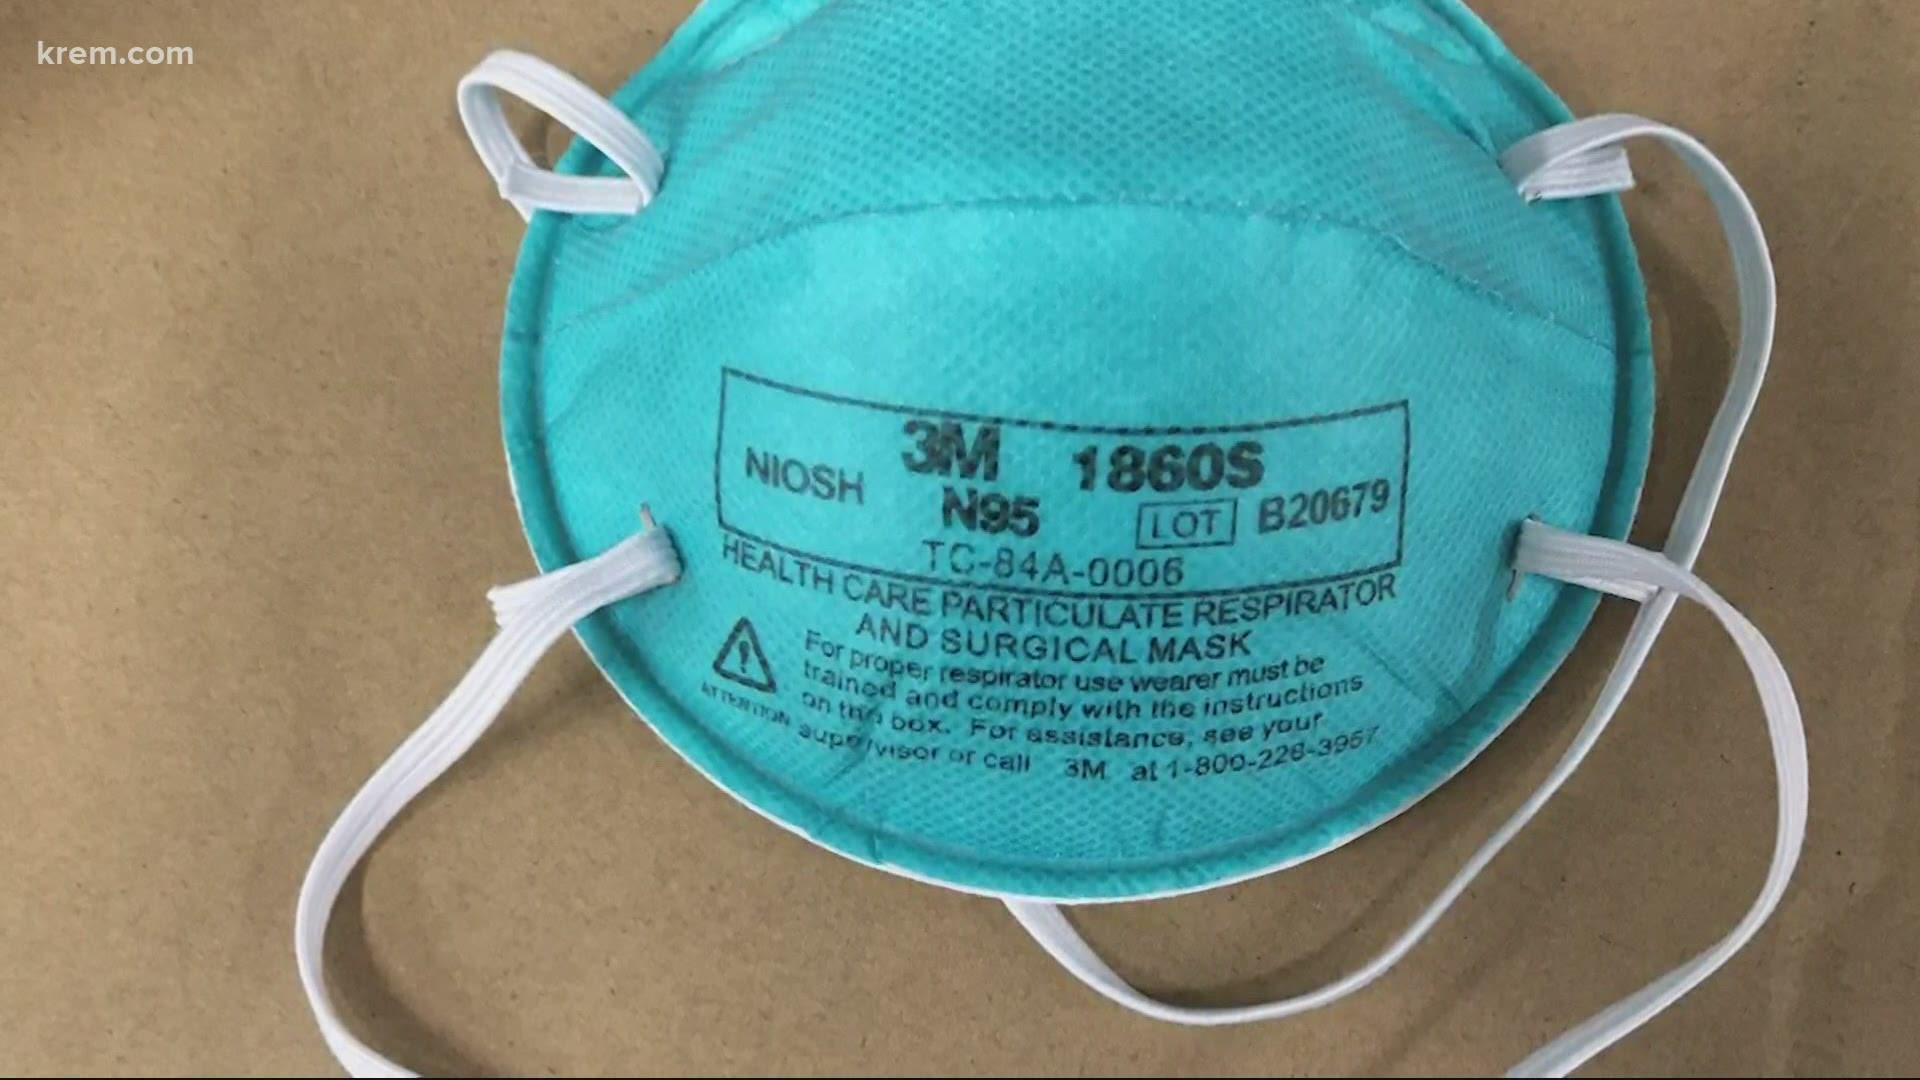 The supply of hundreds of thousands of N95 masks at dozens of Washington hospitals are impacted by counterfeit masks in circulation, according to the WSHA.